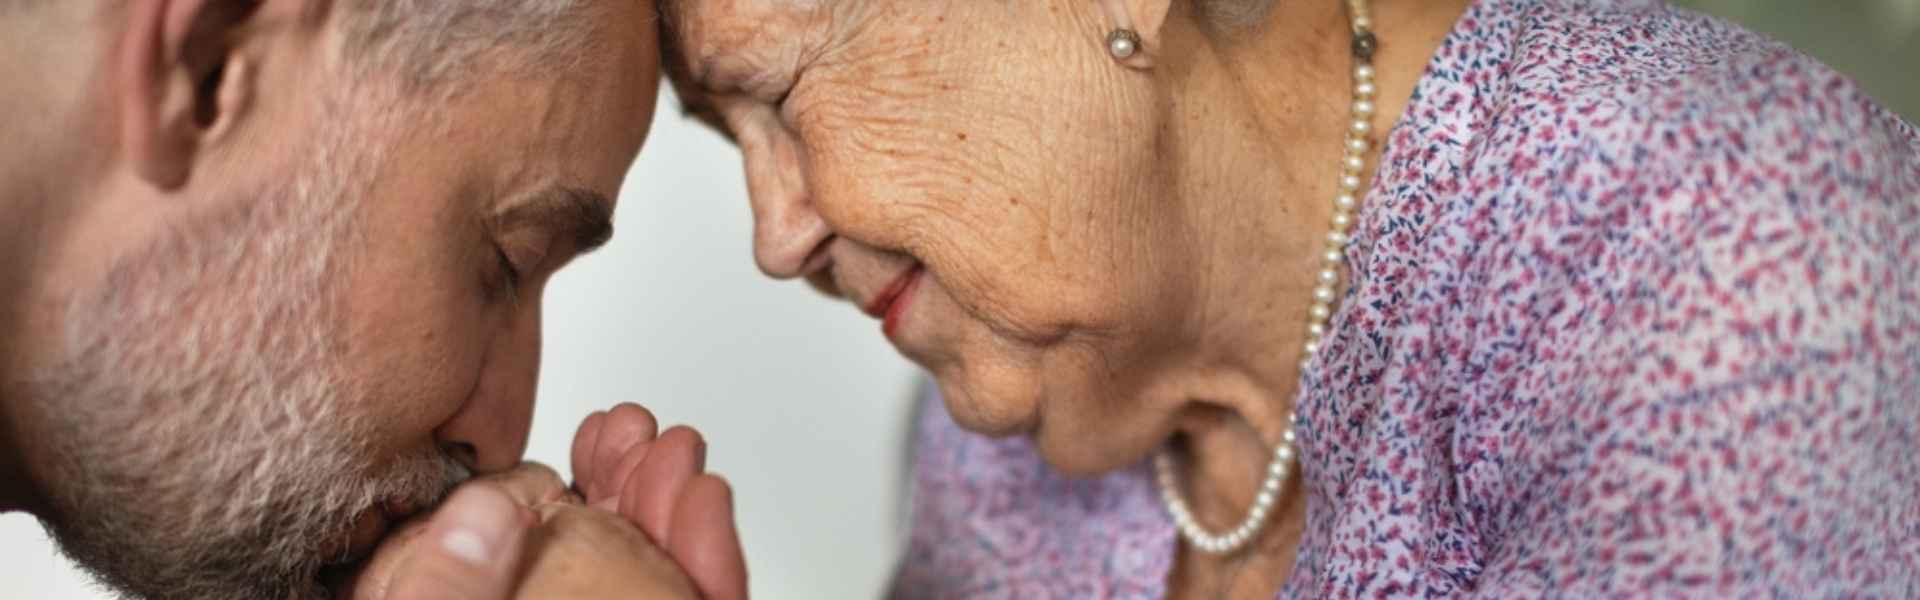 adult man kissing his senior mother's hand